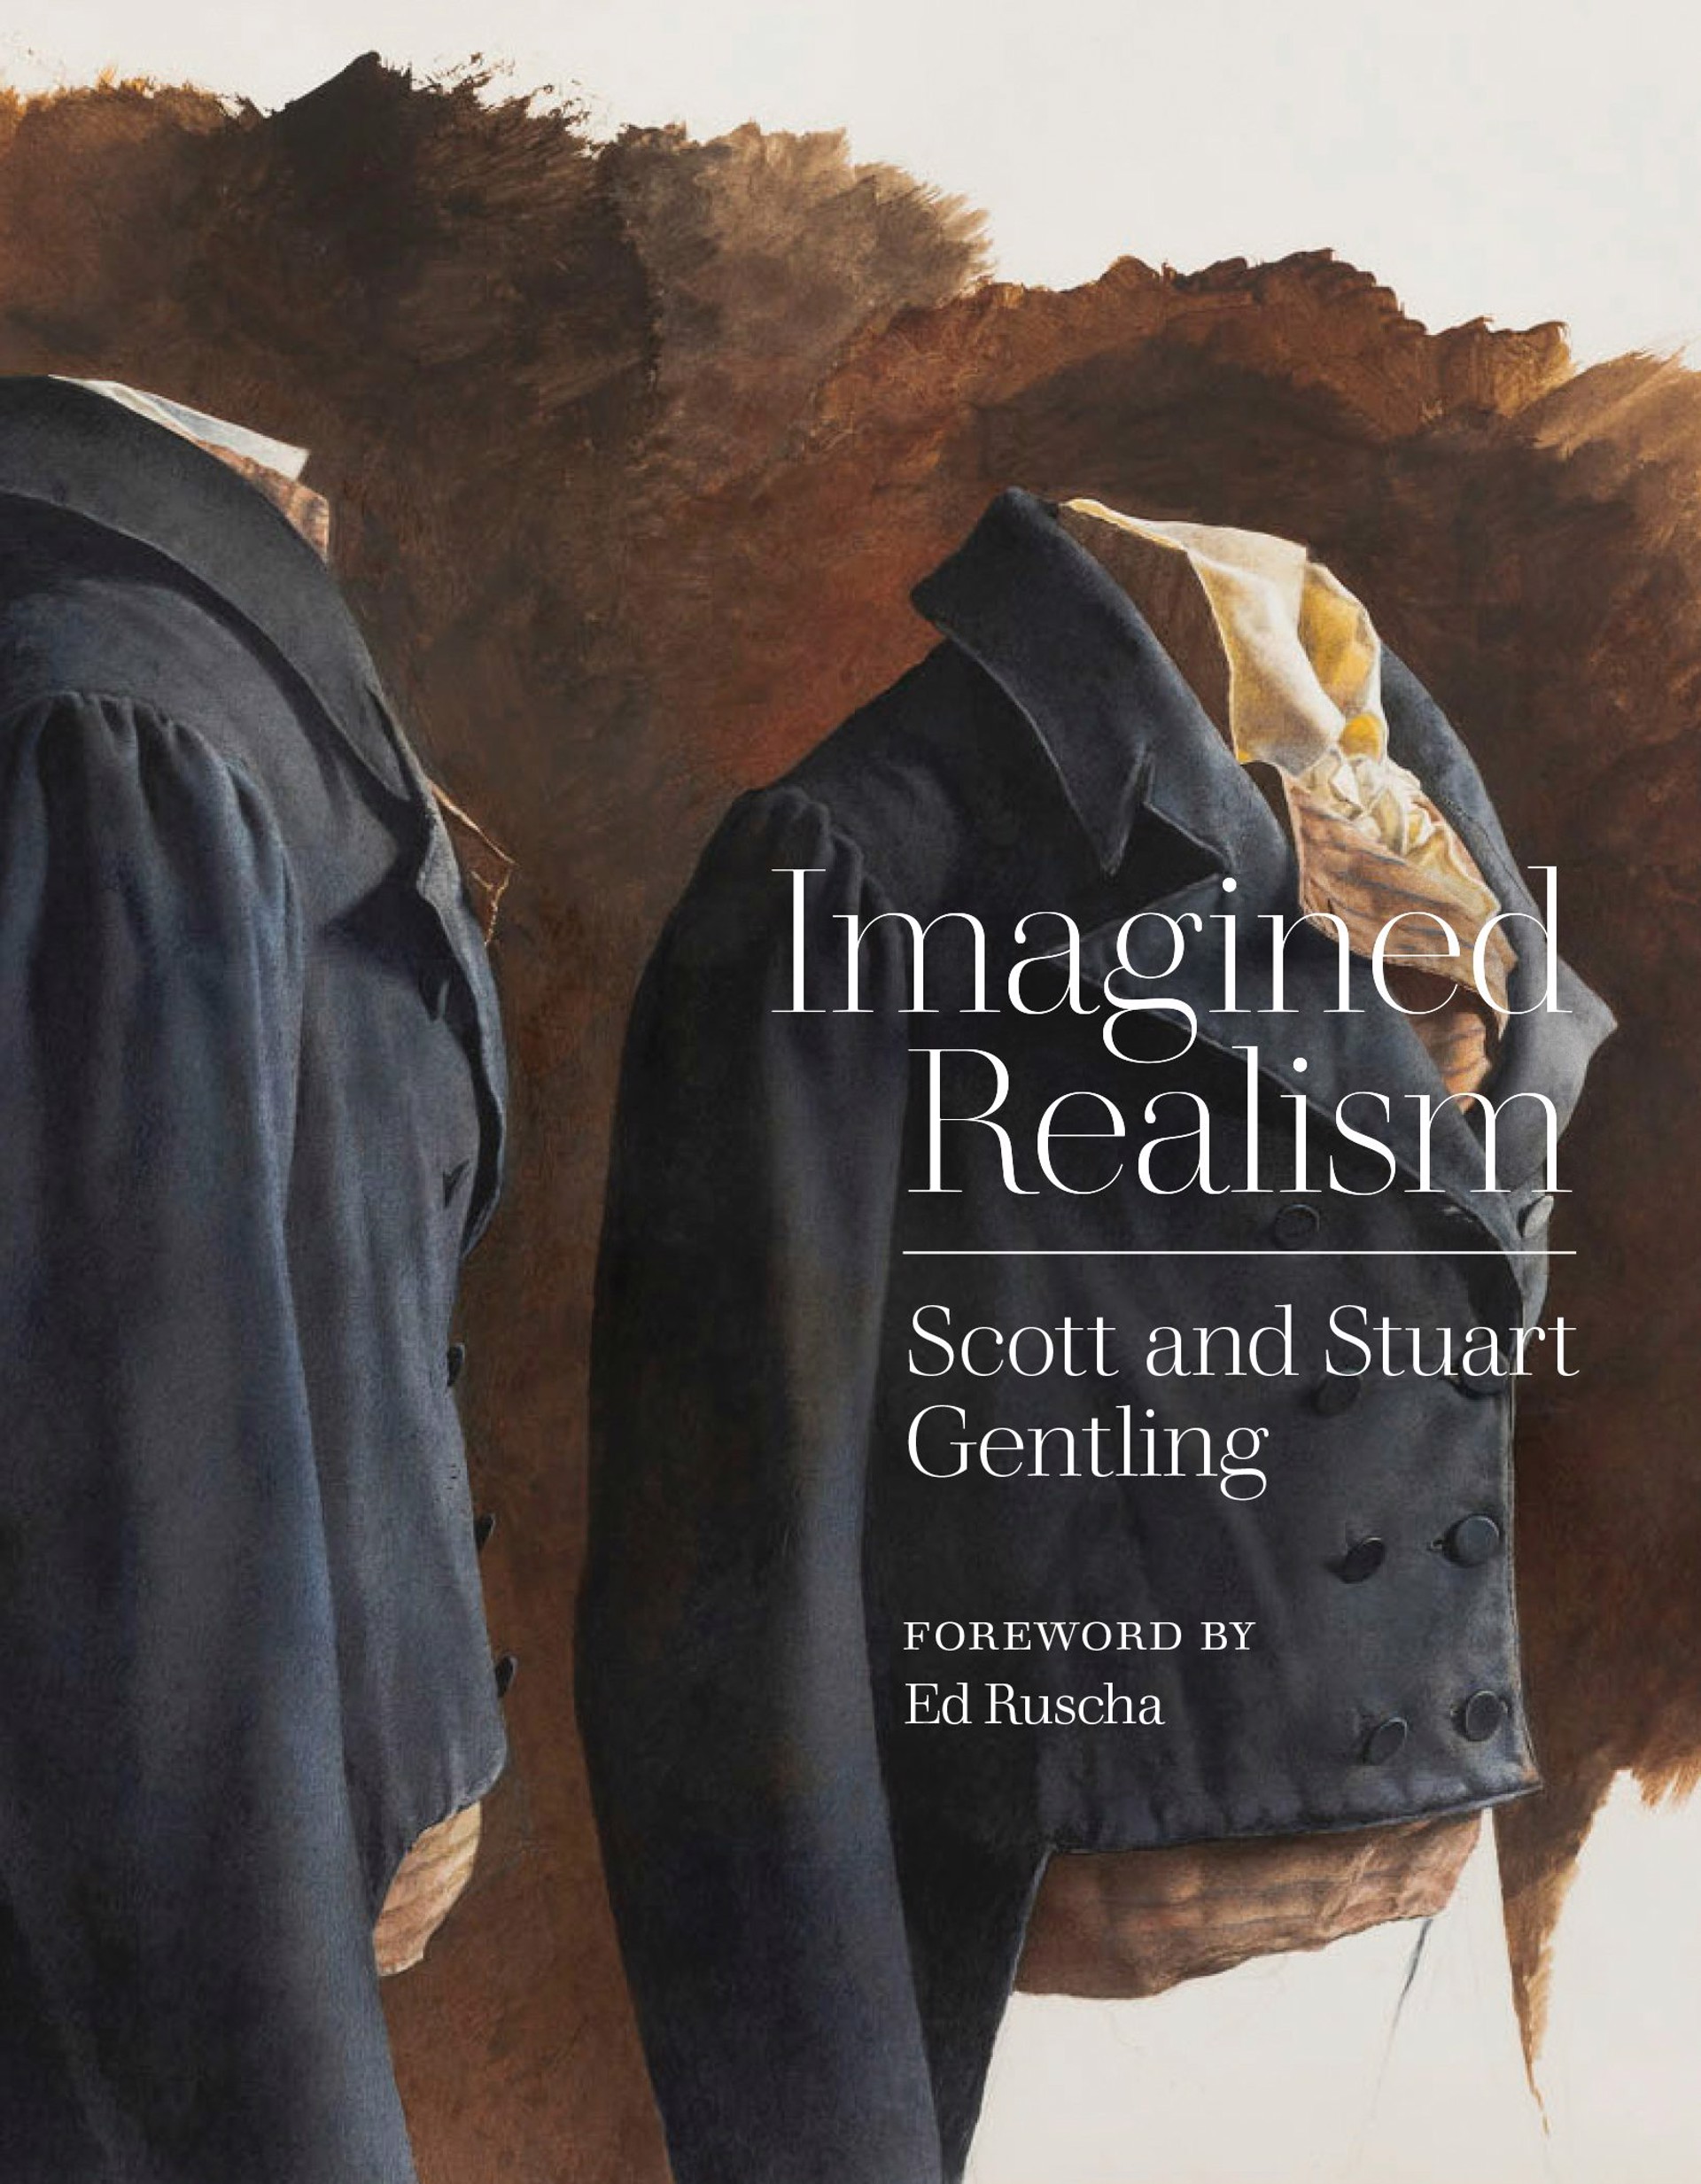 Imagined Realism, Scott and Stuart Gentling by Publications